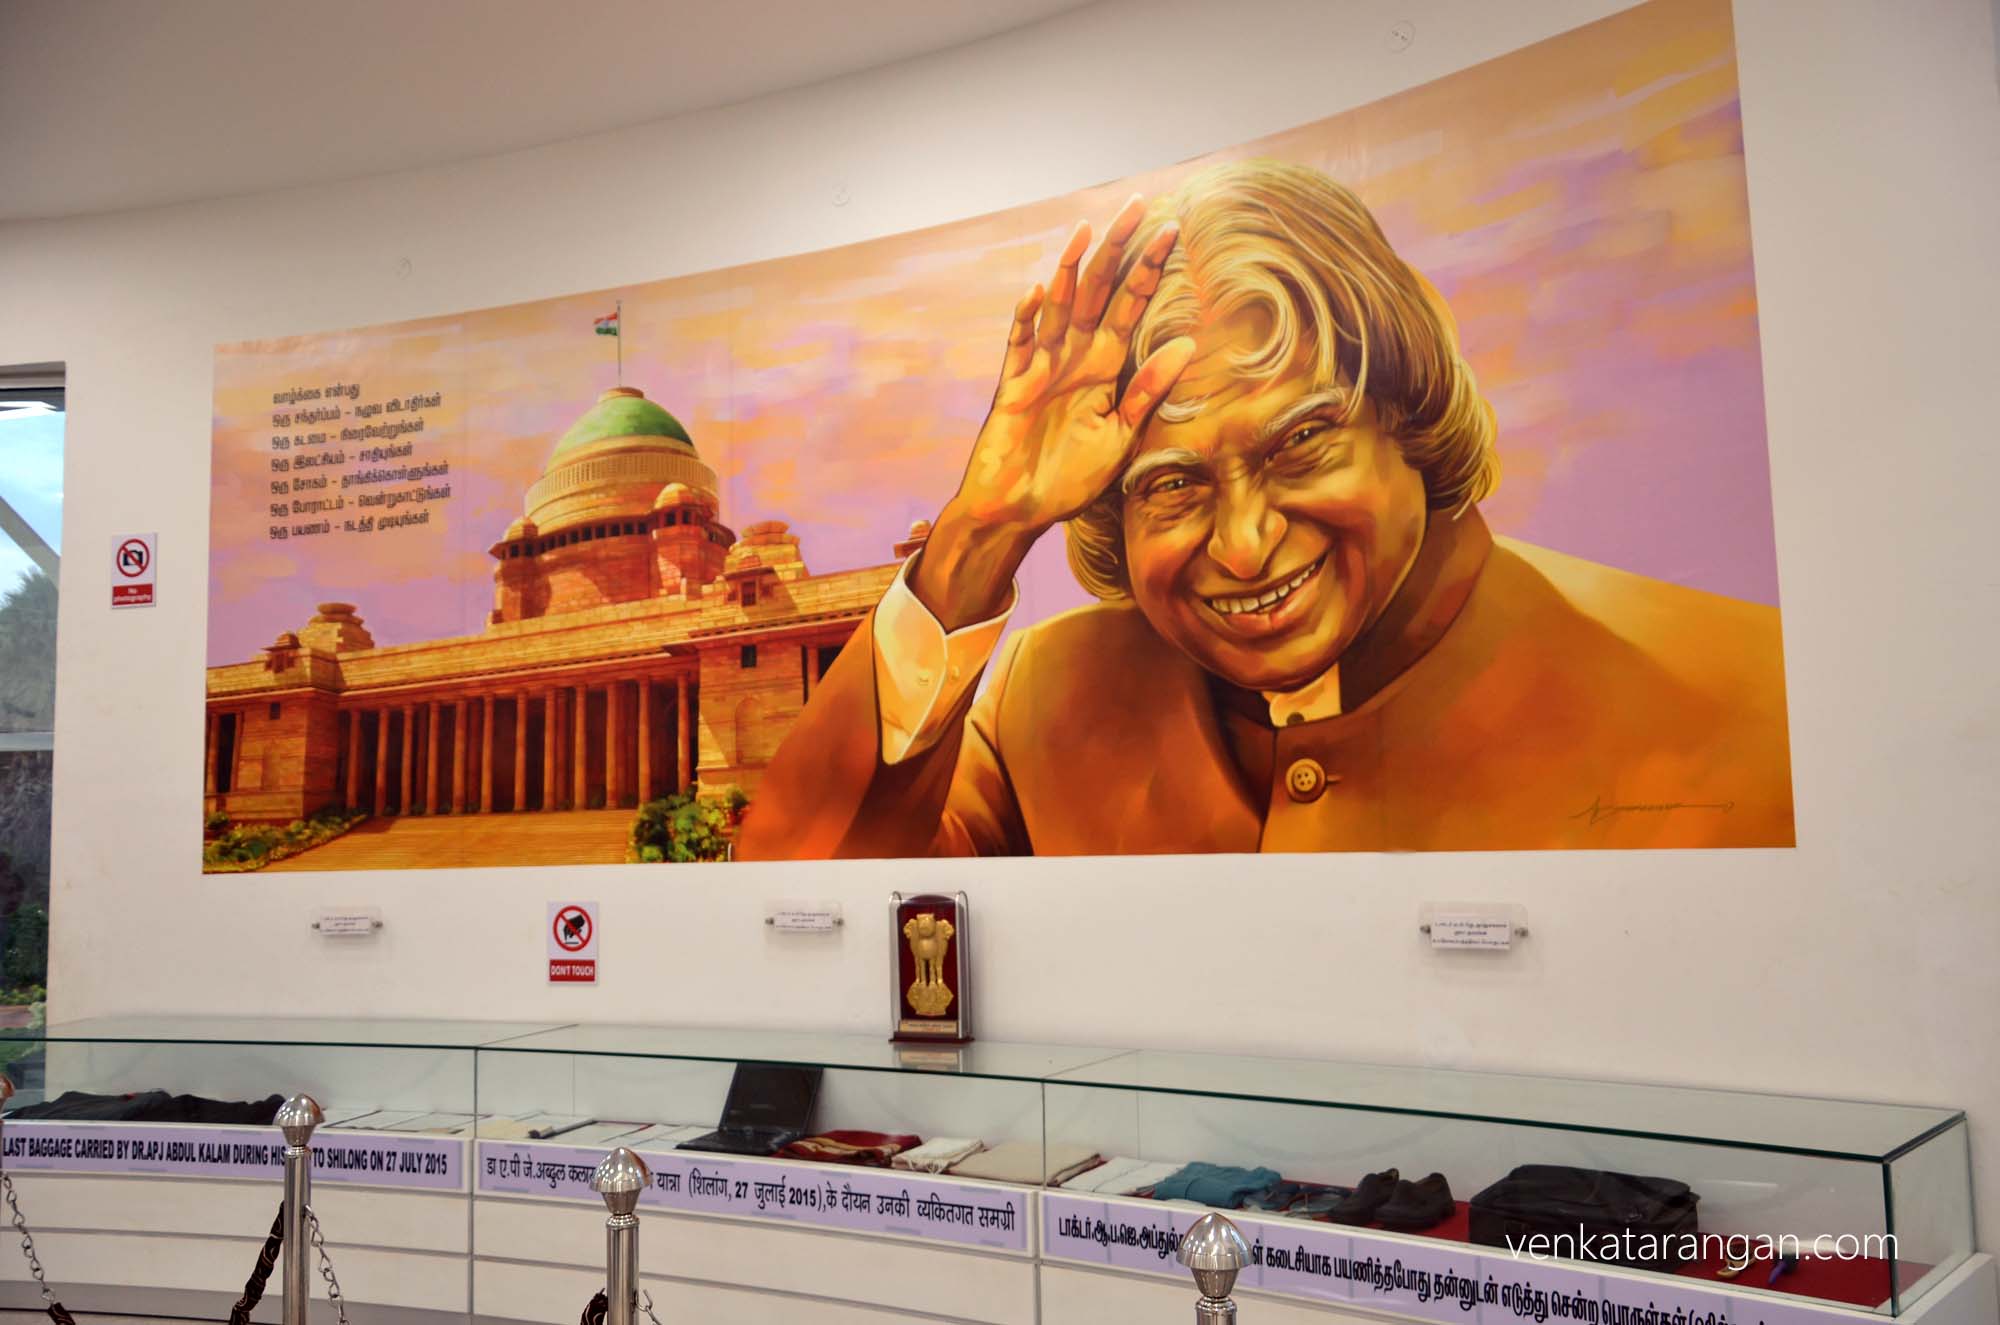 Personal belongings of Dr Kalam on his last trip to Shillong 27 July 2015